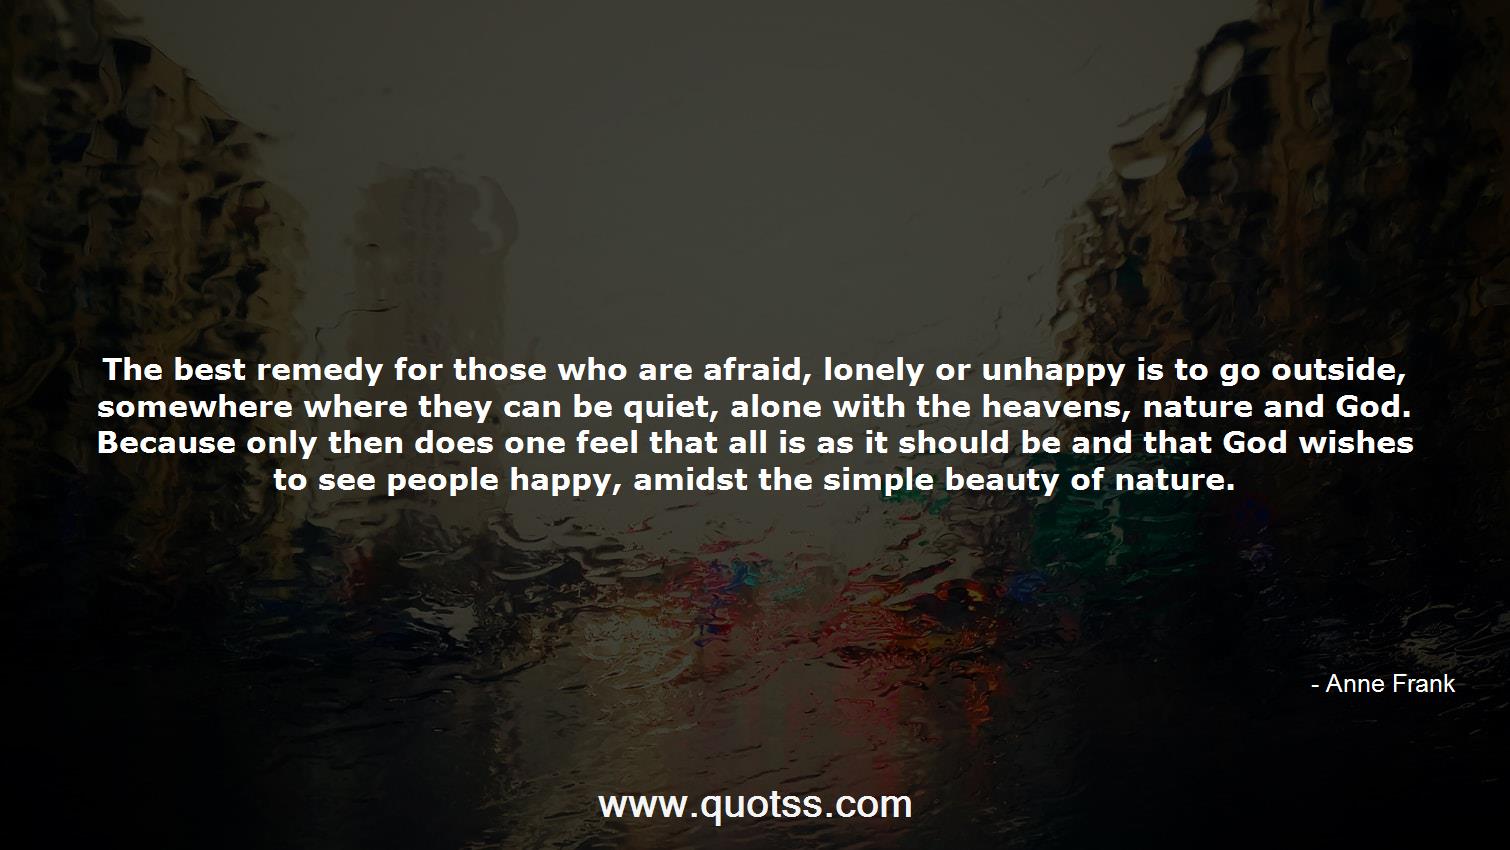 Anne Frank Quote on Quotss